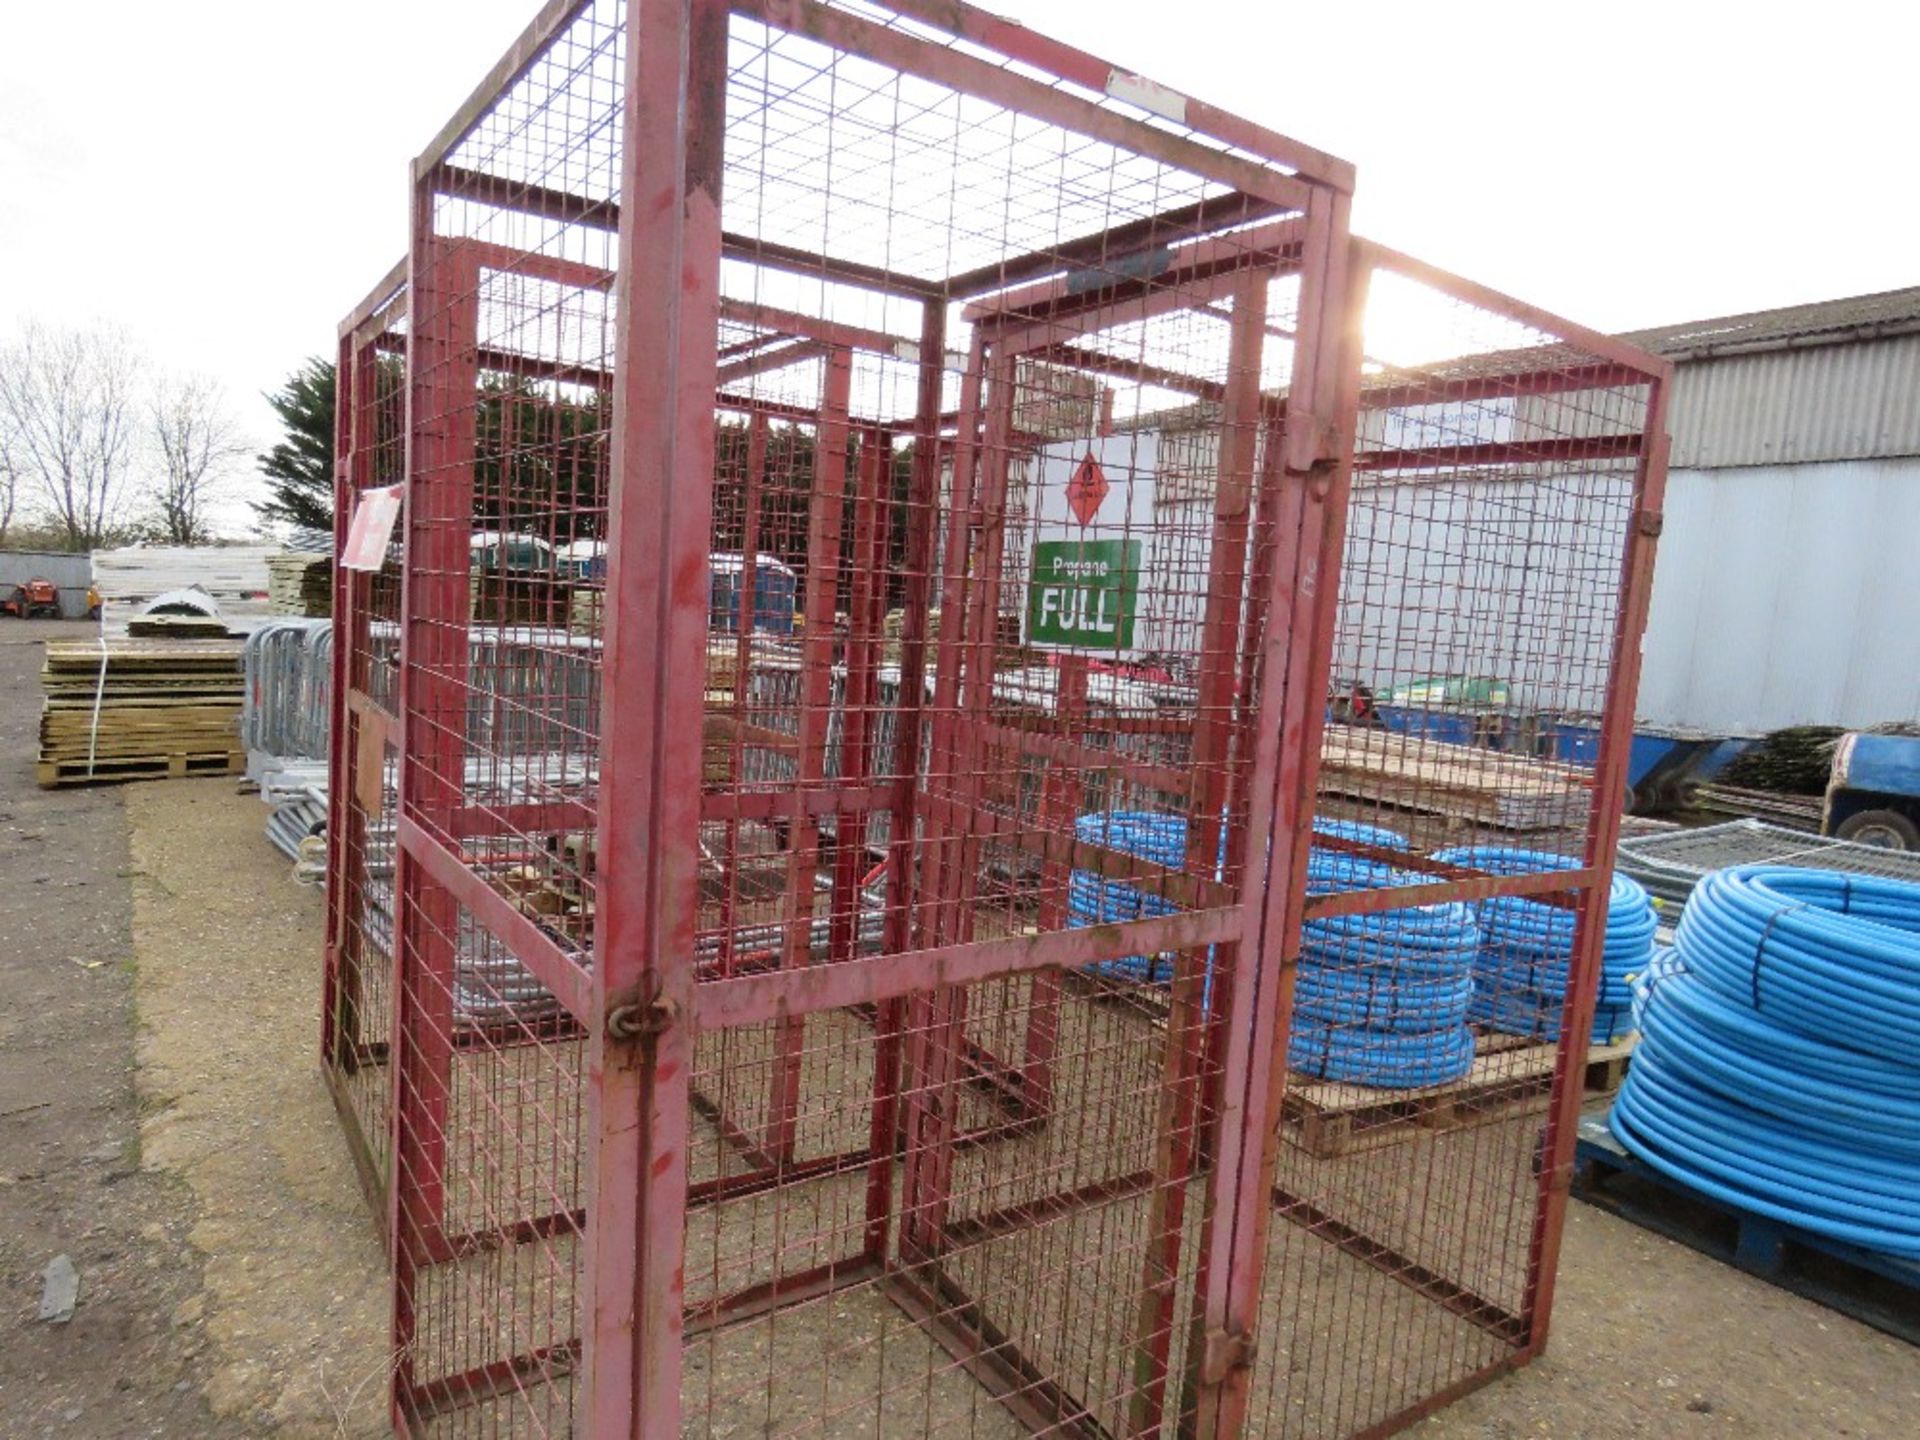 2 X SINGLE GAS BOTTLE STORAGE CAGES 1.0M X 1.0M X 1.15M HEIGHT APPROX NO VAT ON HAMMER PRICE - Image 3 of 5